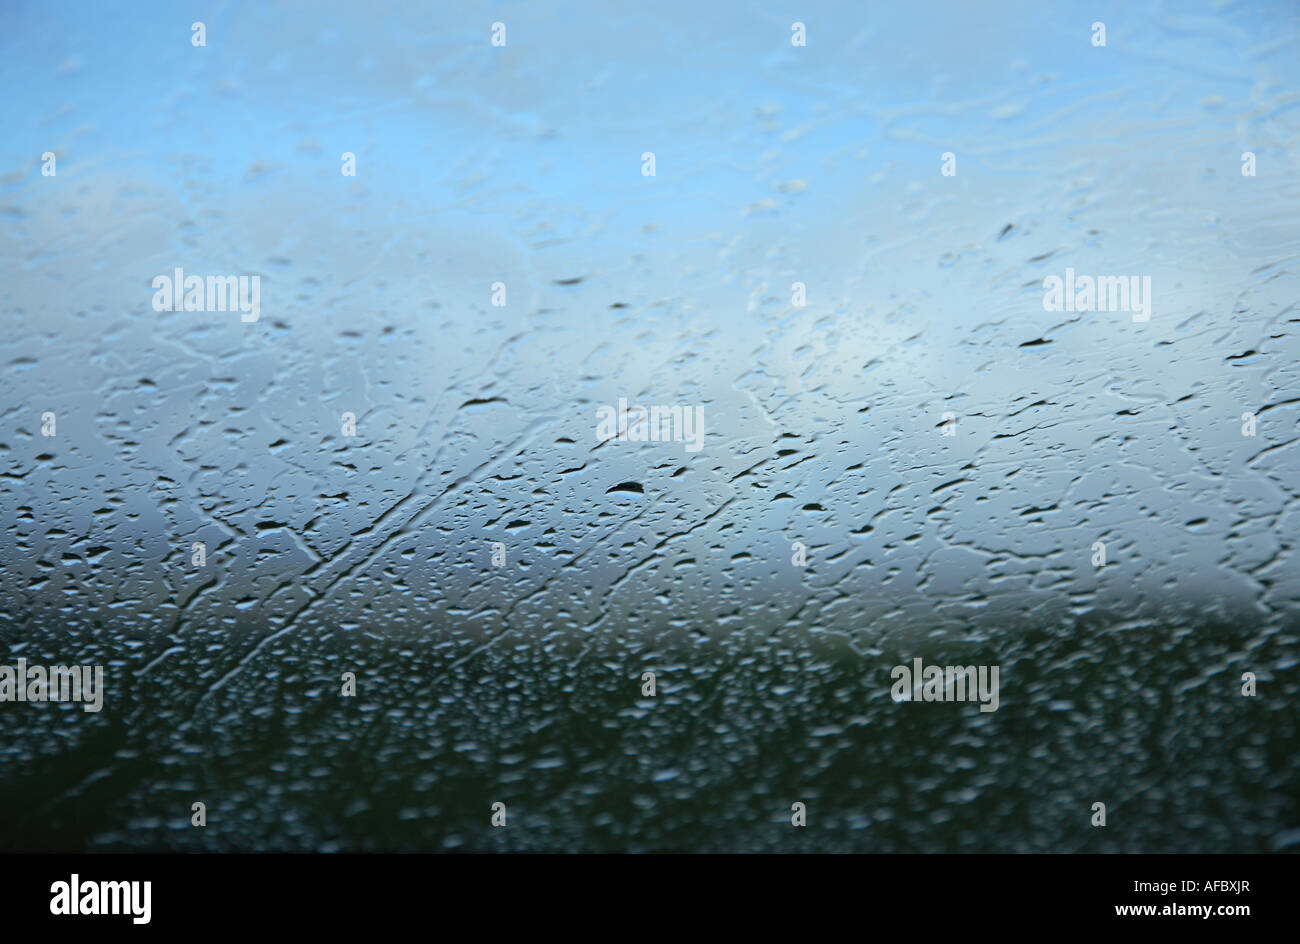 Water droplets on window Stock Photo